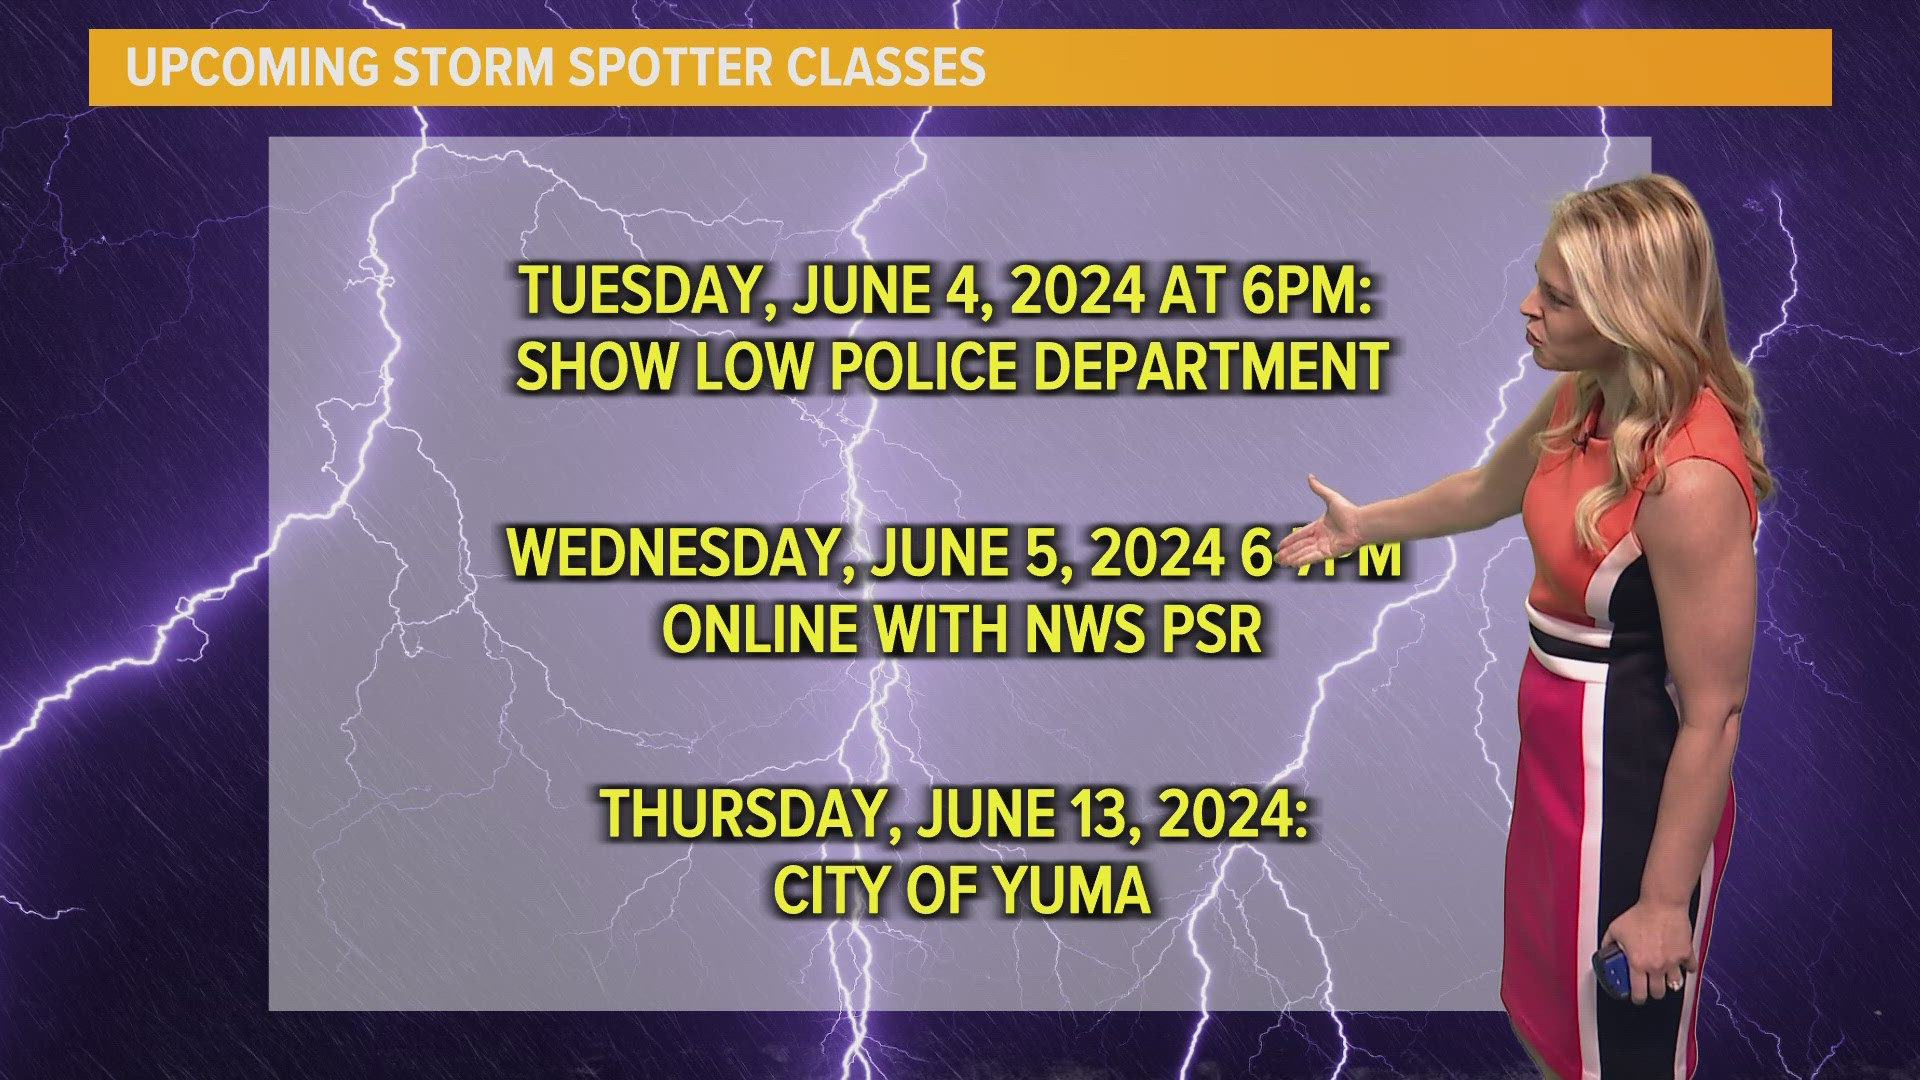 If you're interested in becoming a trained storm spotter or want to brush up your severe weather knowledge, there are a few remaining classes. The sessions are free.